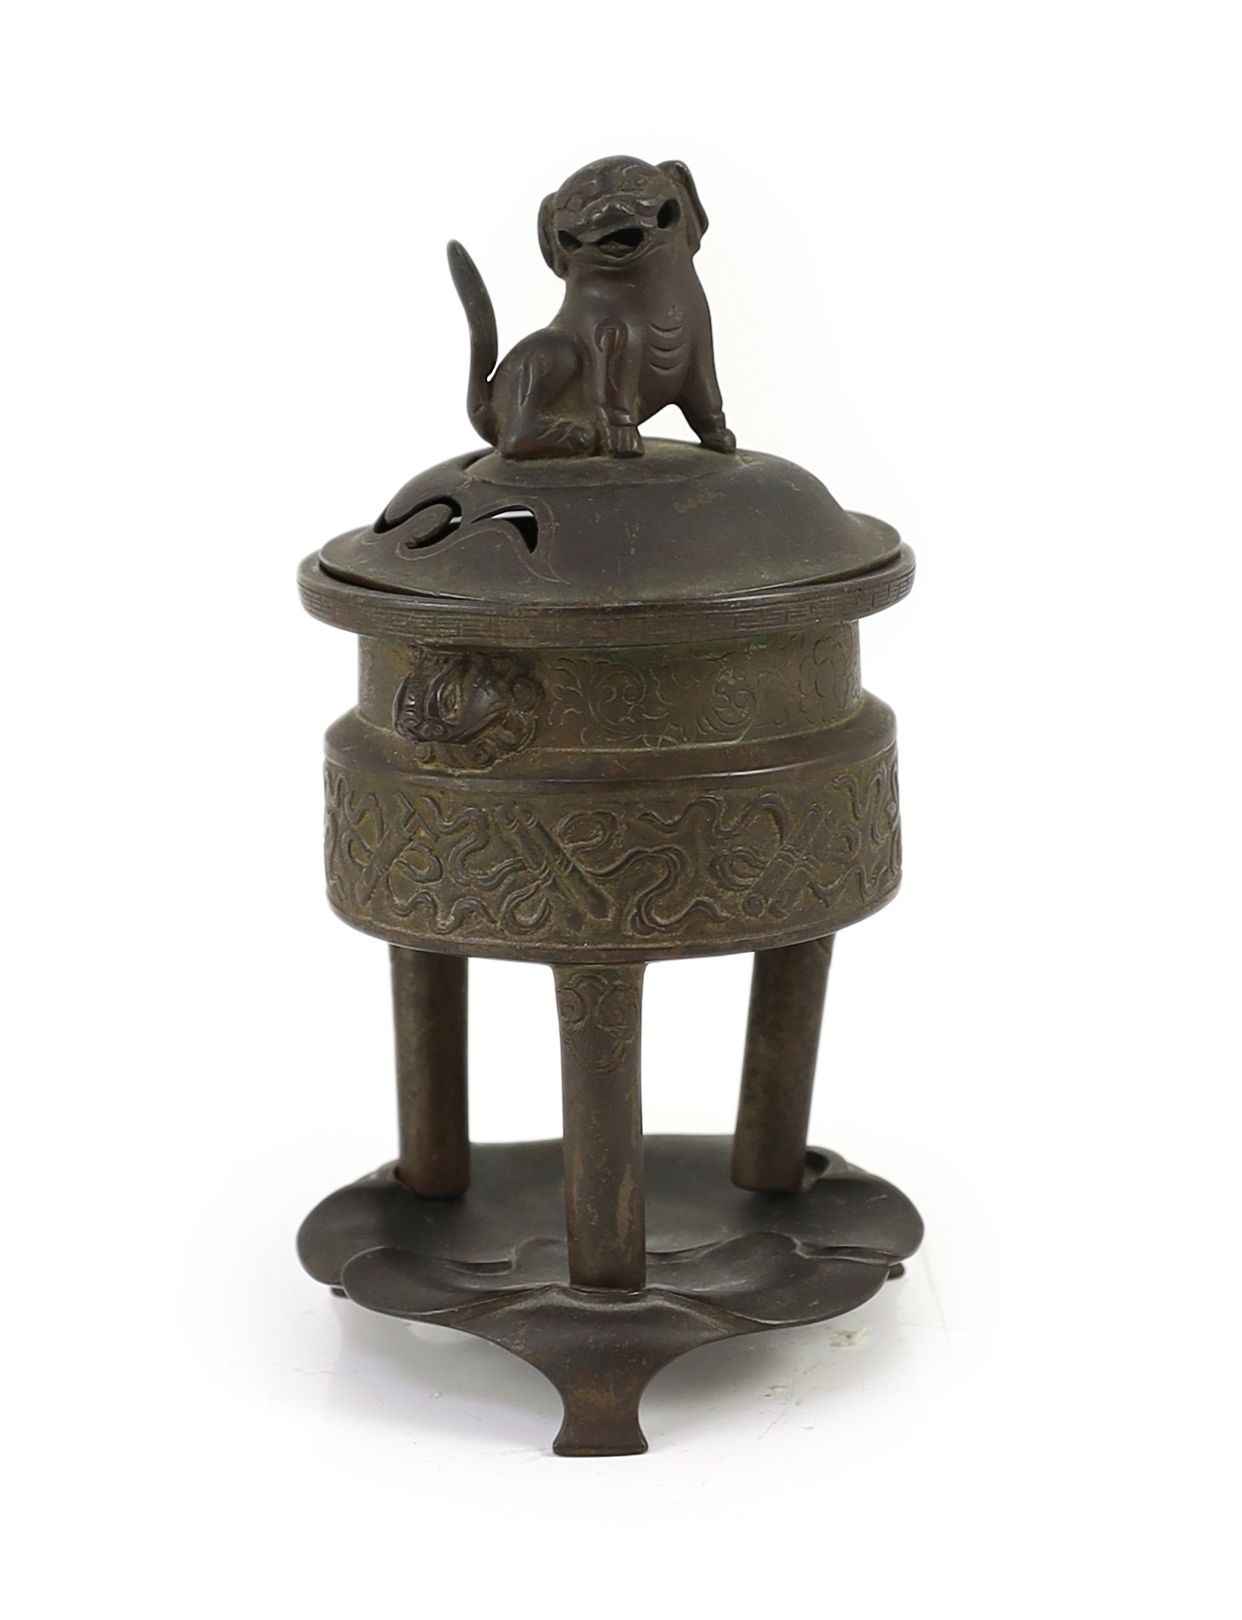 A Chinese bronze tripod censer, ding, Xuande mark, 18th/19th century, with associated cover and stand, 9.5 cm diameter